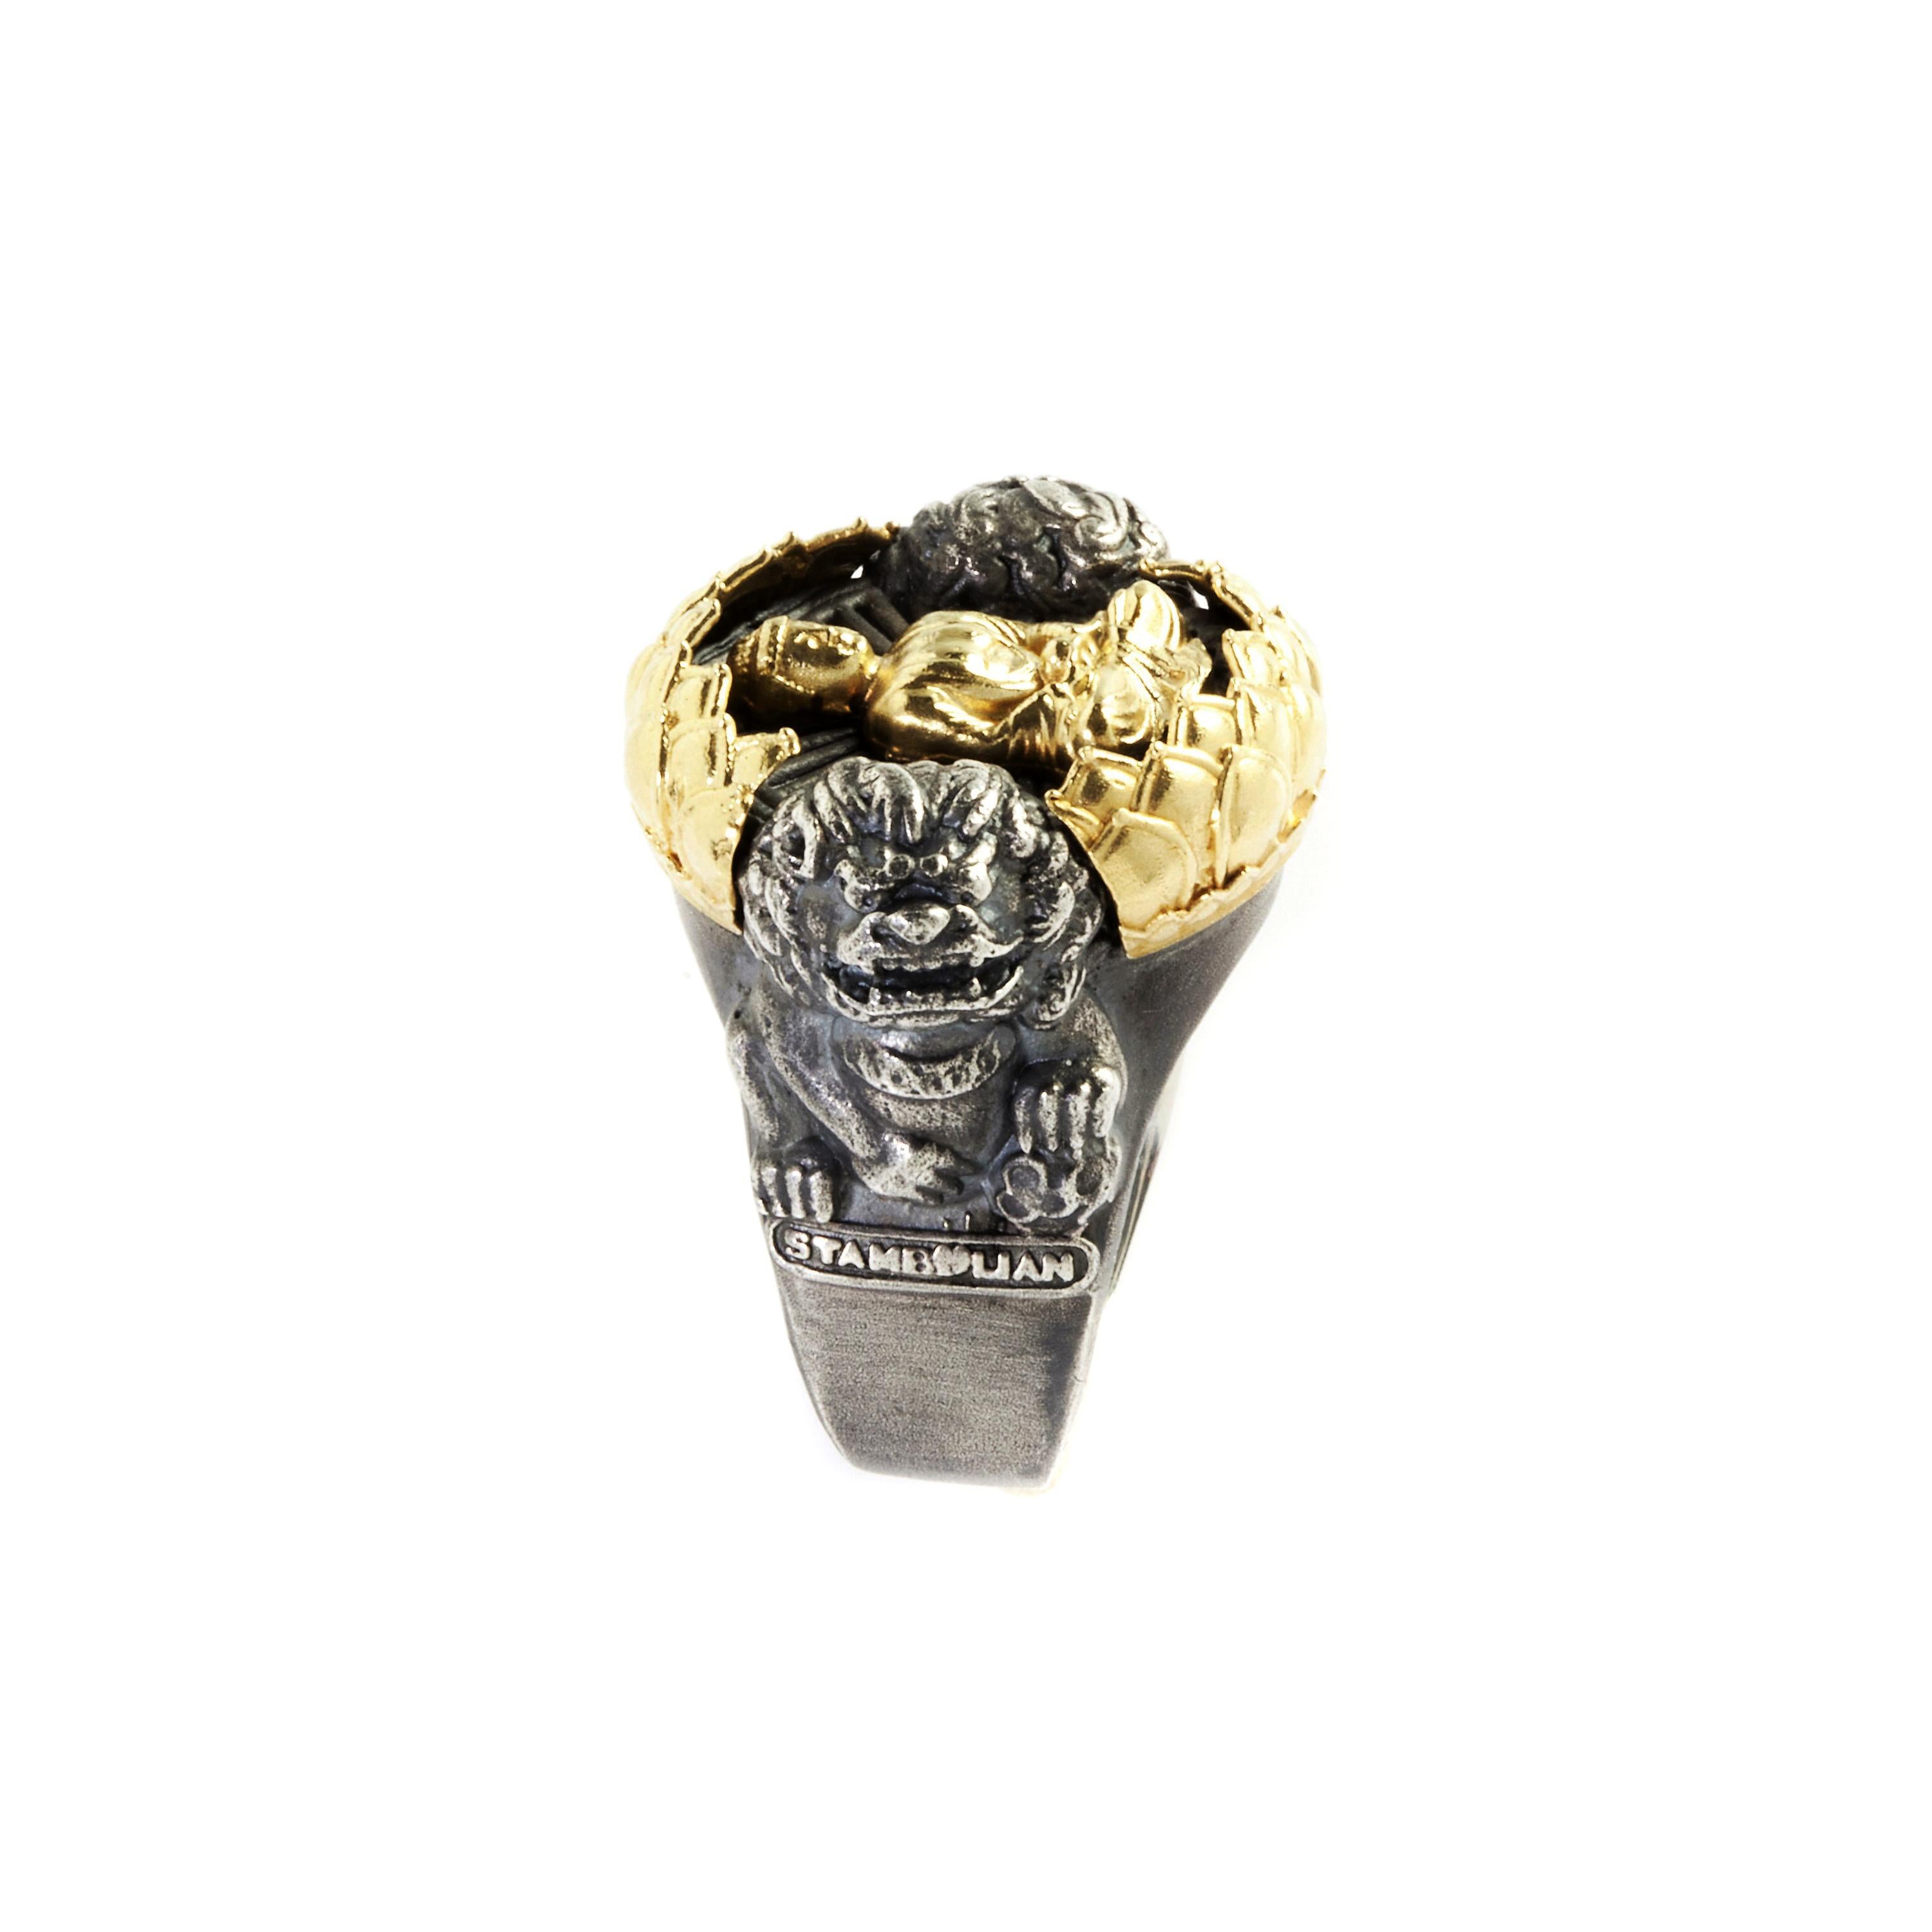 Aged Silver & 18K Gold Buddha Ring with Two Guardian Lions by Stambolian

This Art-to-wear piece showcases a Buddha center done in yellow gold guarded by two lions.

Ring is size 8. Sizable.

1.2 inch face length x 0.95 width 
Band width: 0.50